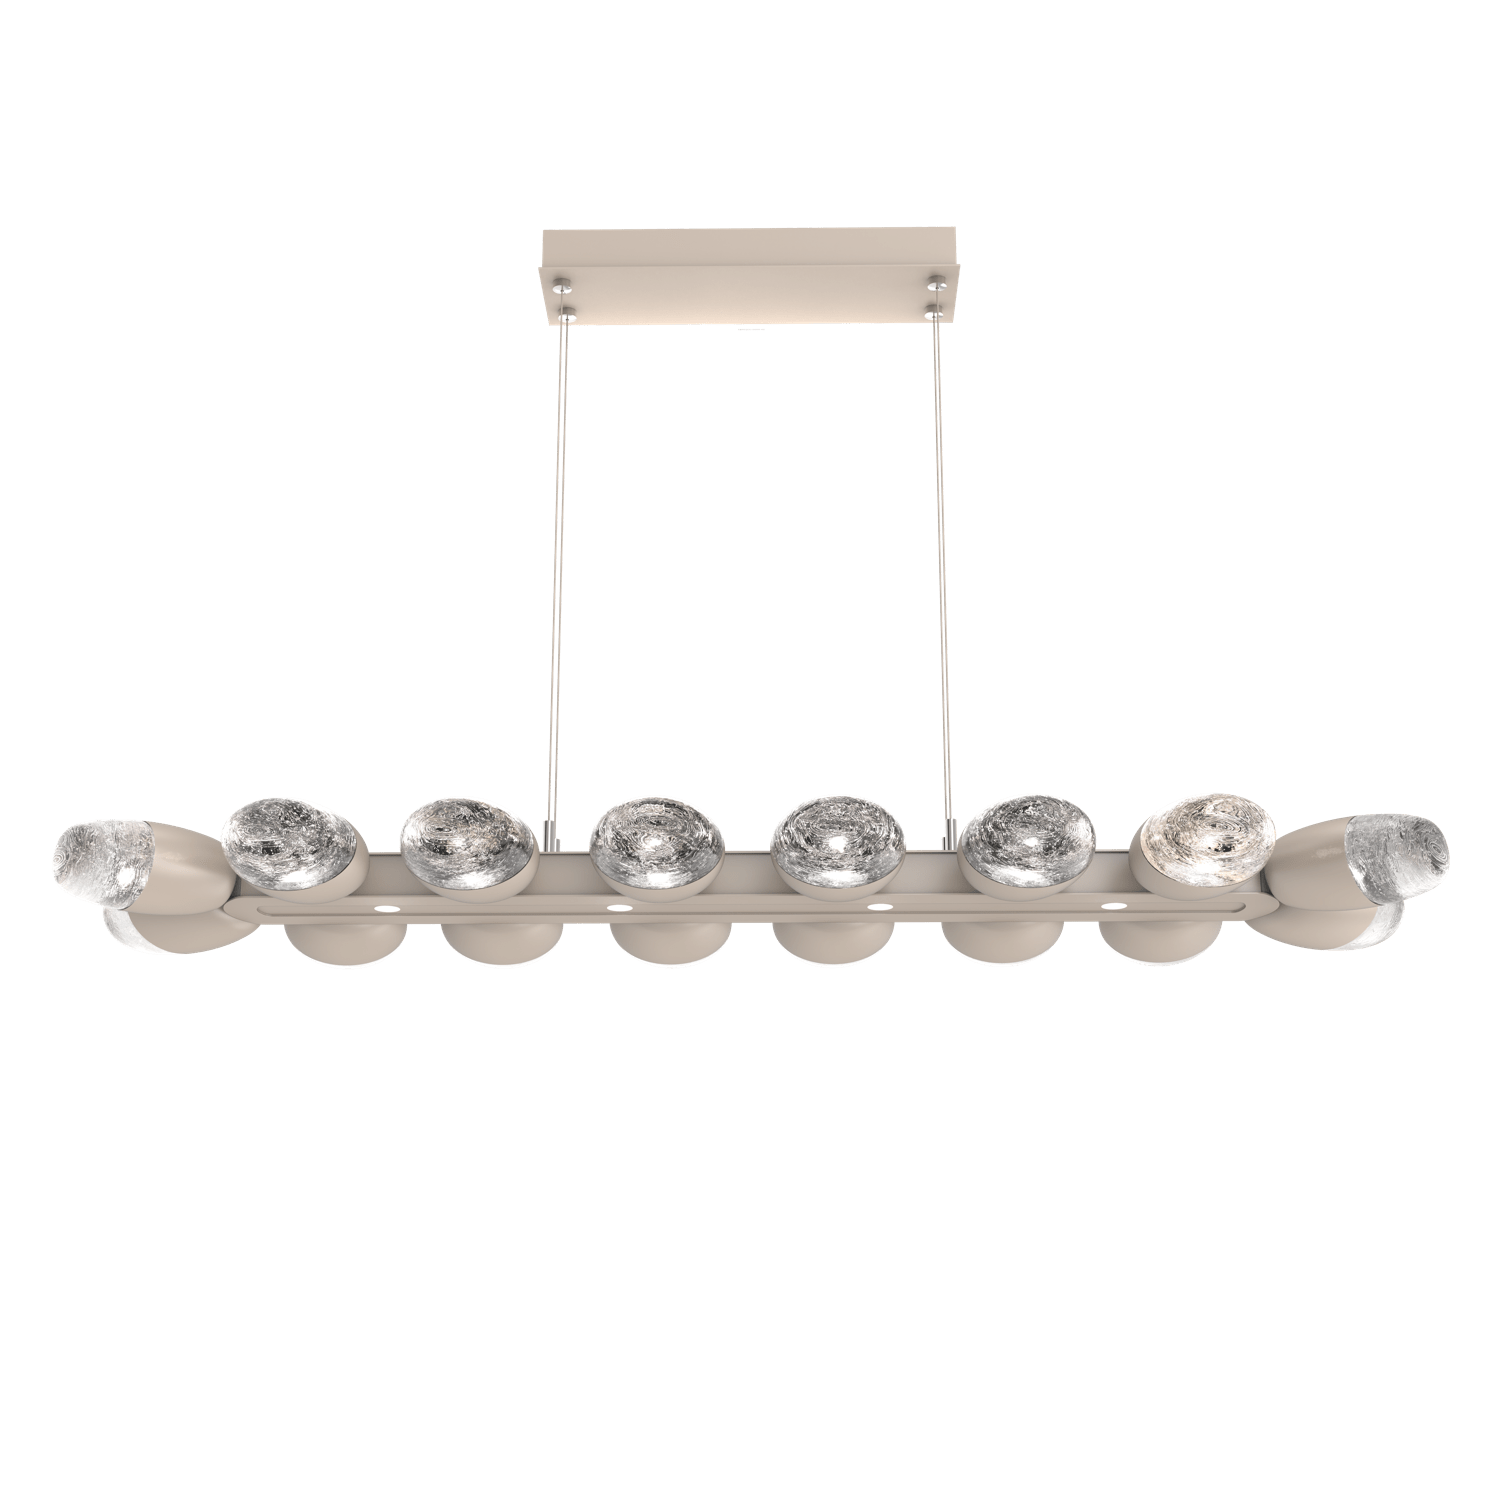 PLB0079-48-BS-Hammerton-Studio-Pebble-48-inch-linear-chandelier-with-metallic-beige-silver-finish-and-clear-cast-glass-shades-and-LED-lamping